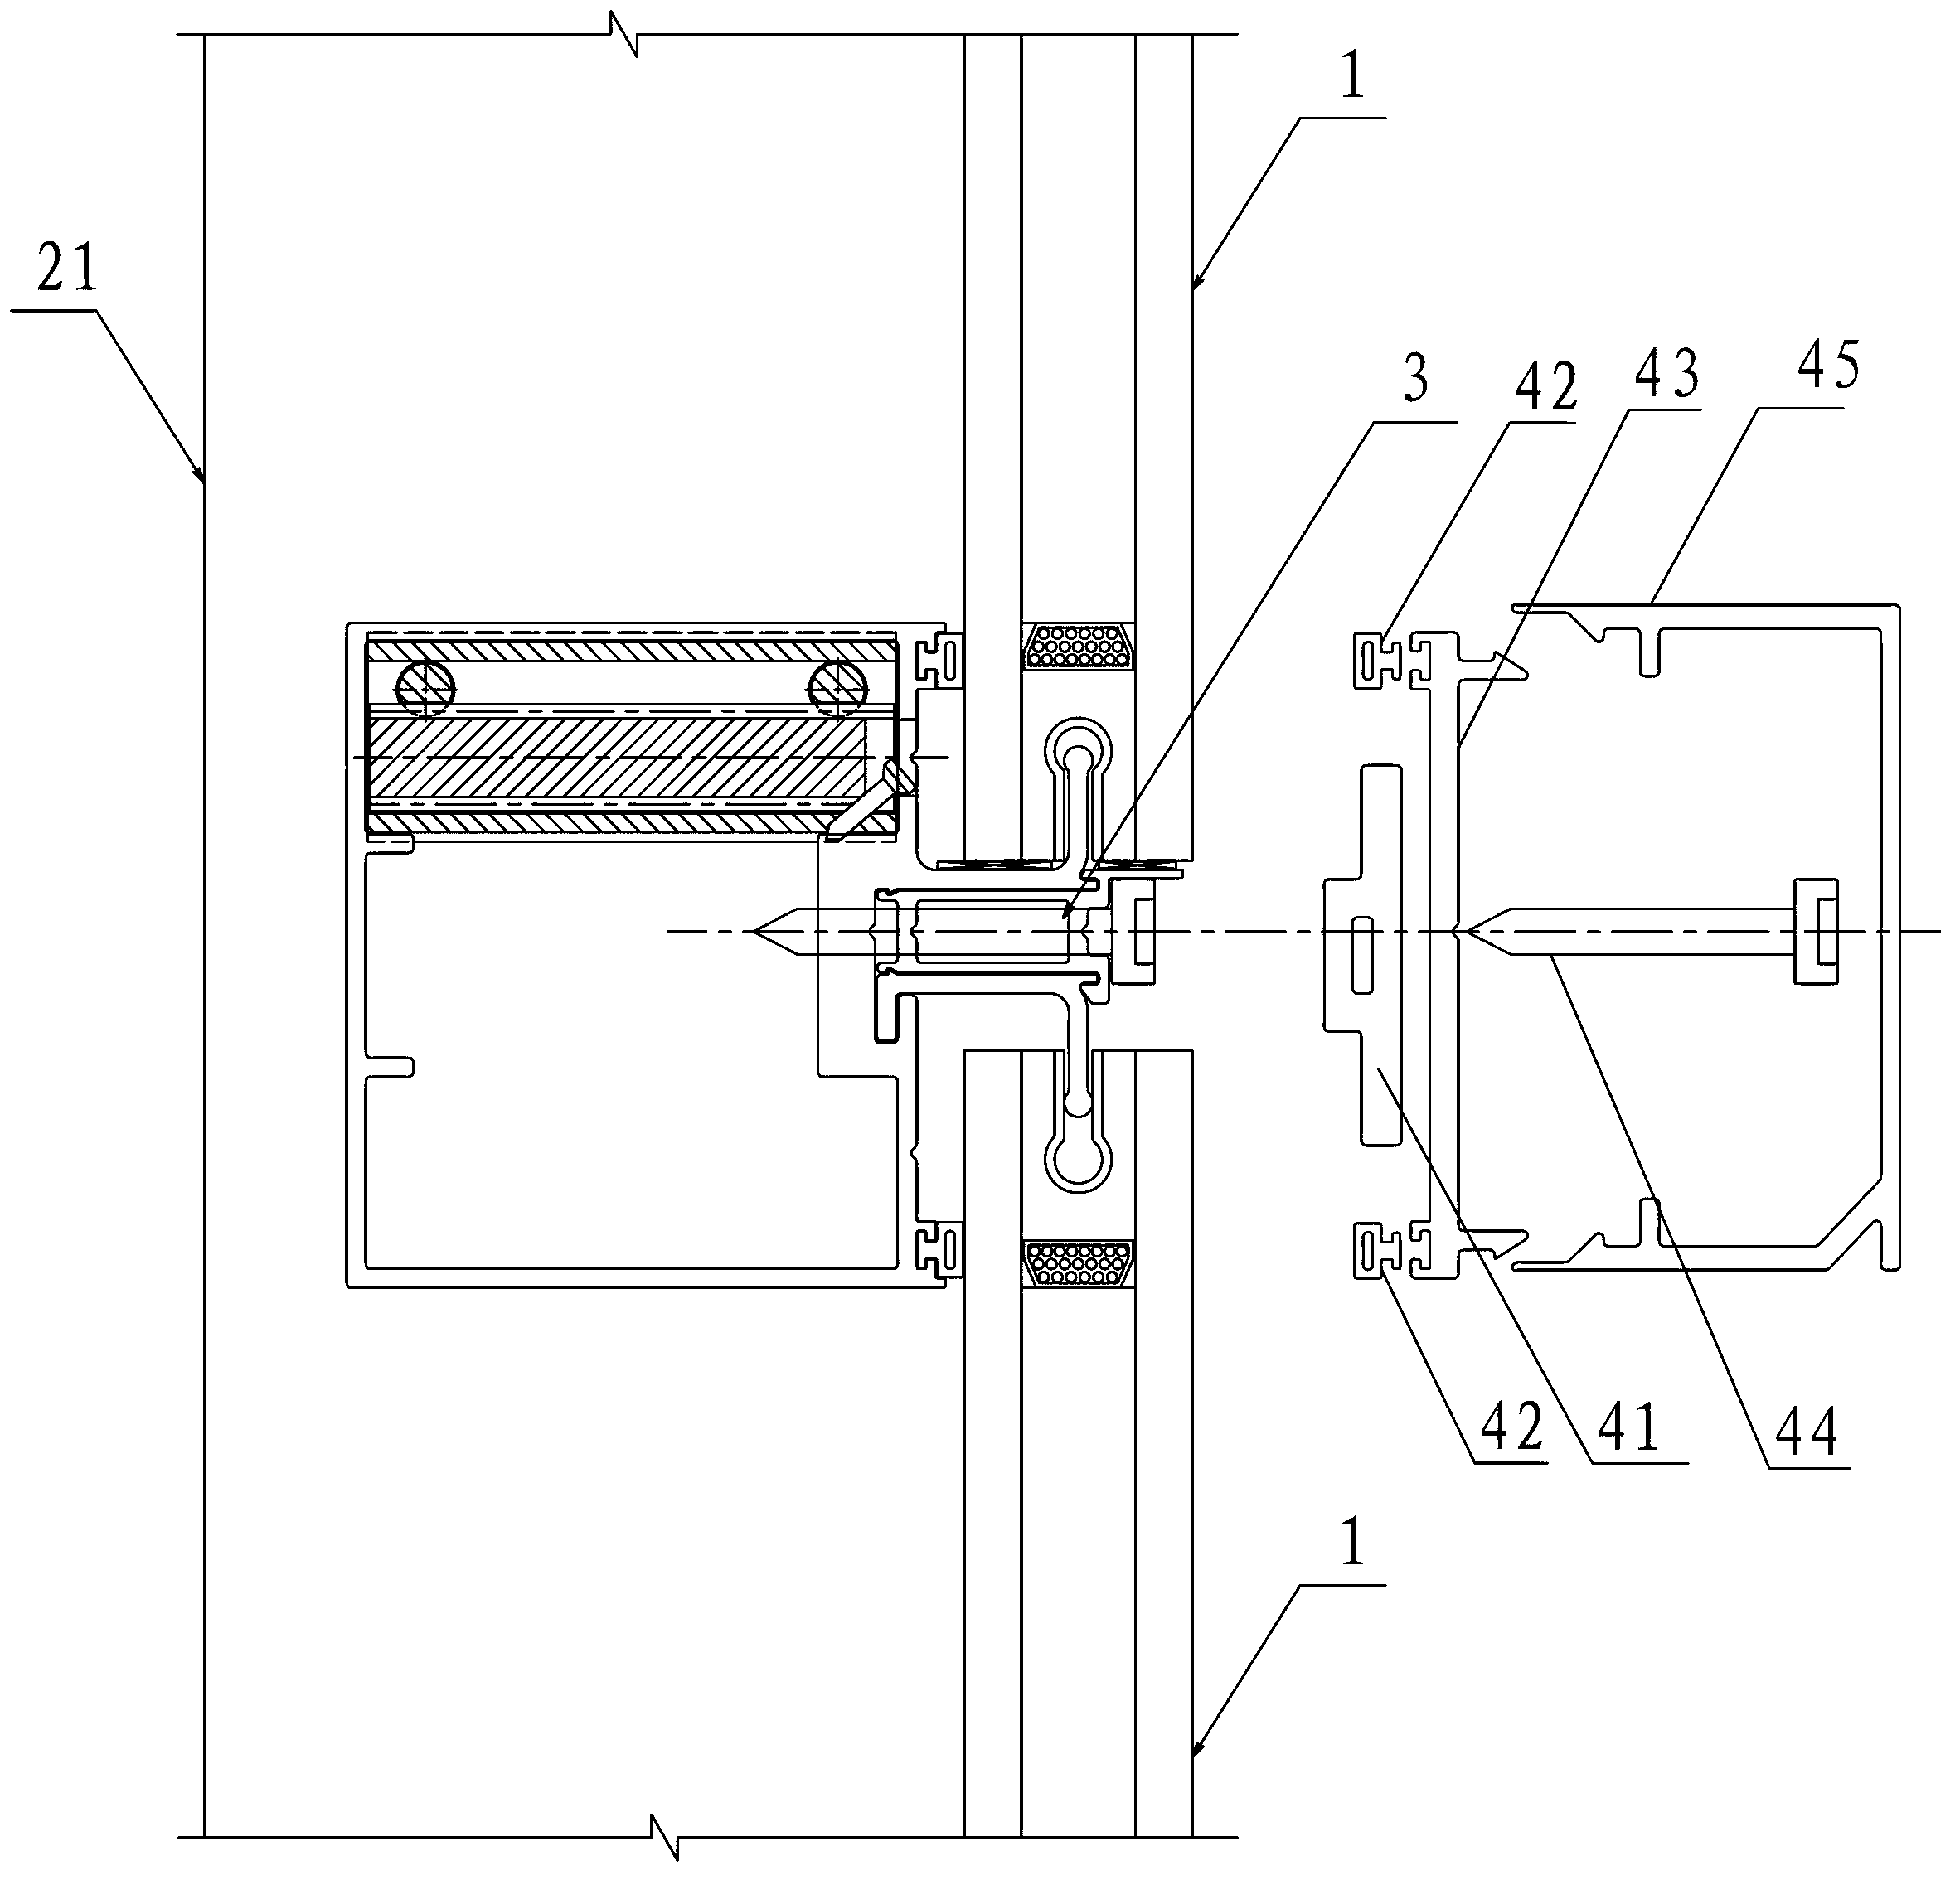 Curtain wall connecting node